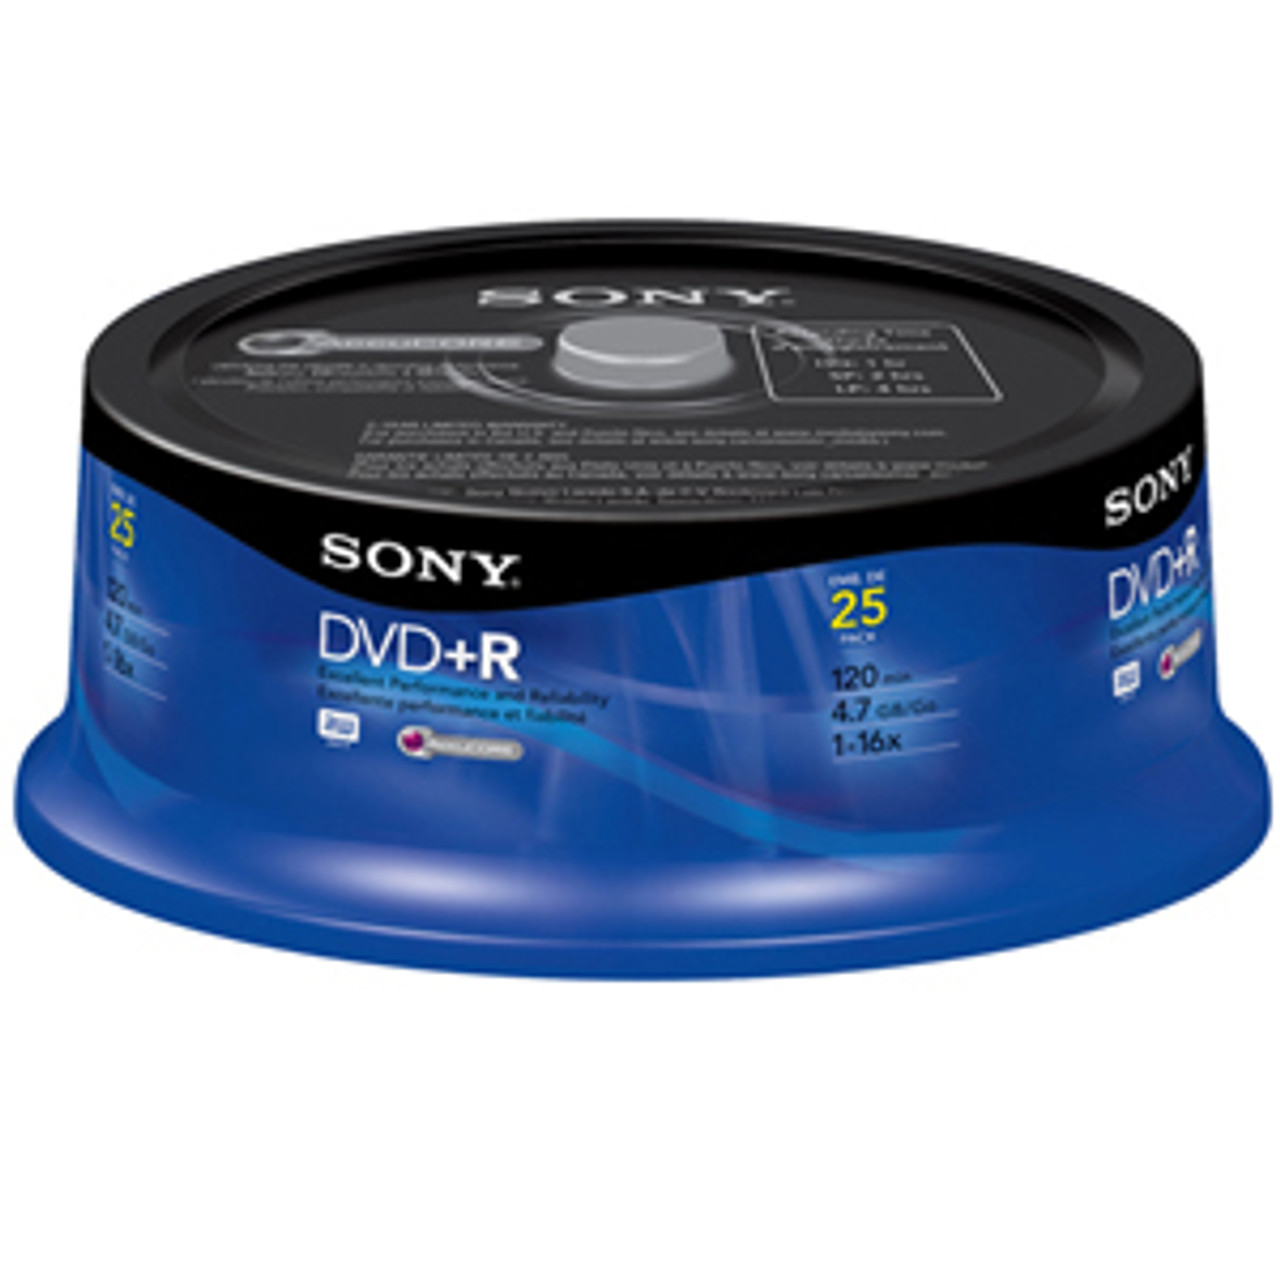 25DPW47RS2 - Sony 4x dvd+RW Media - 4.7GB - 120mm Standard - 25 Pack Spindle